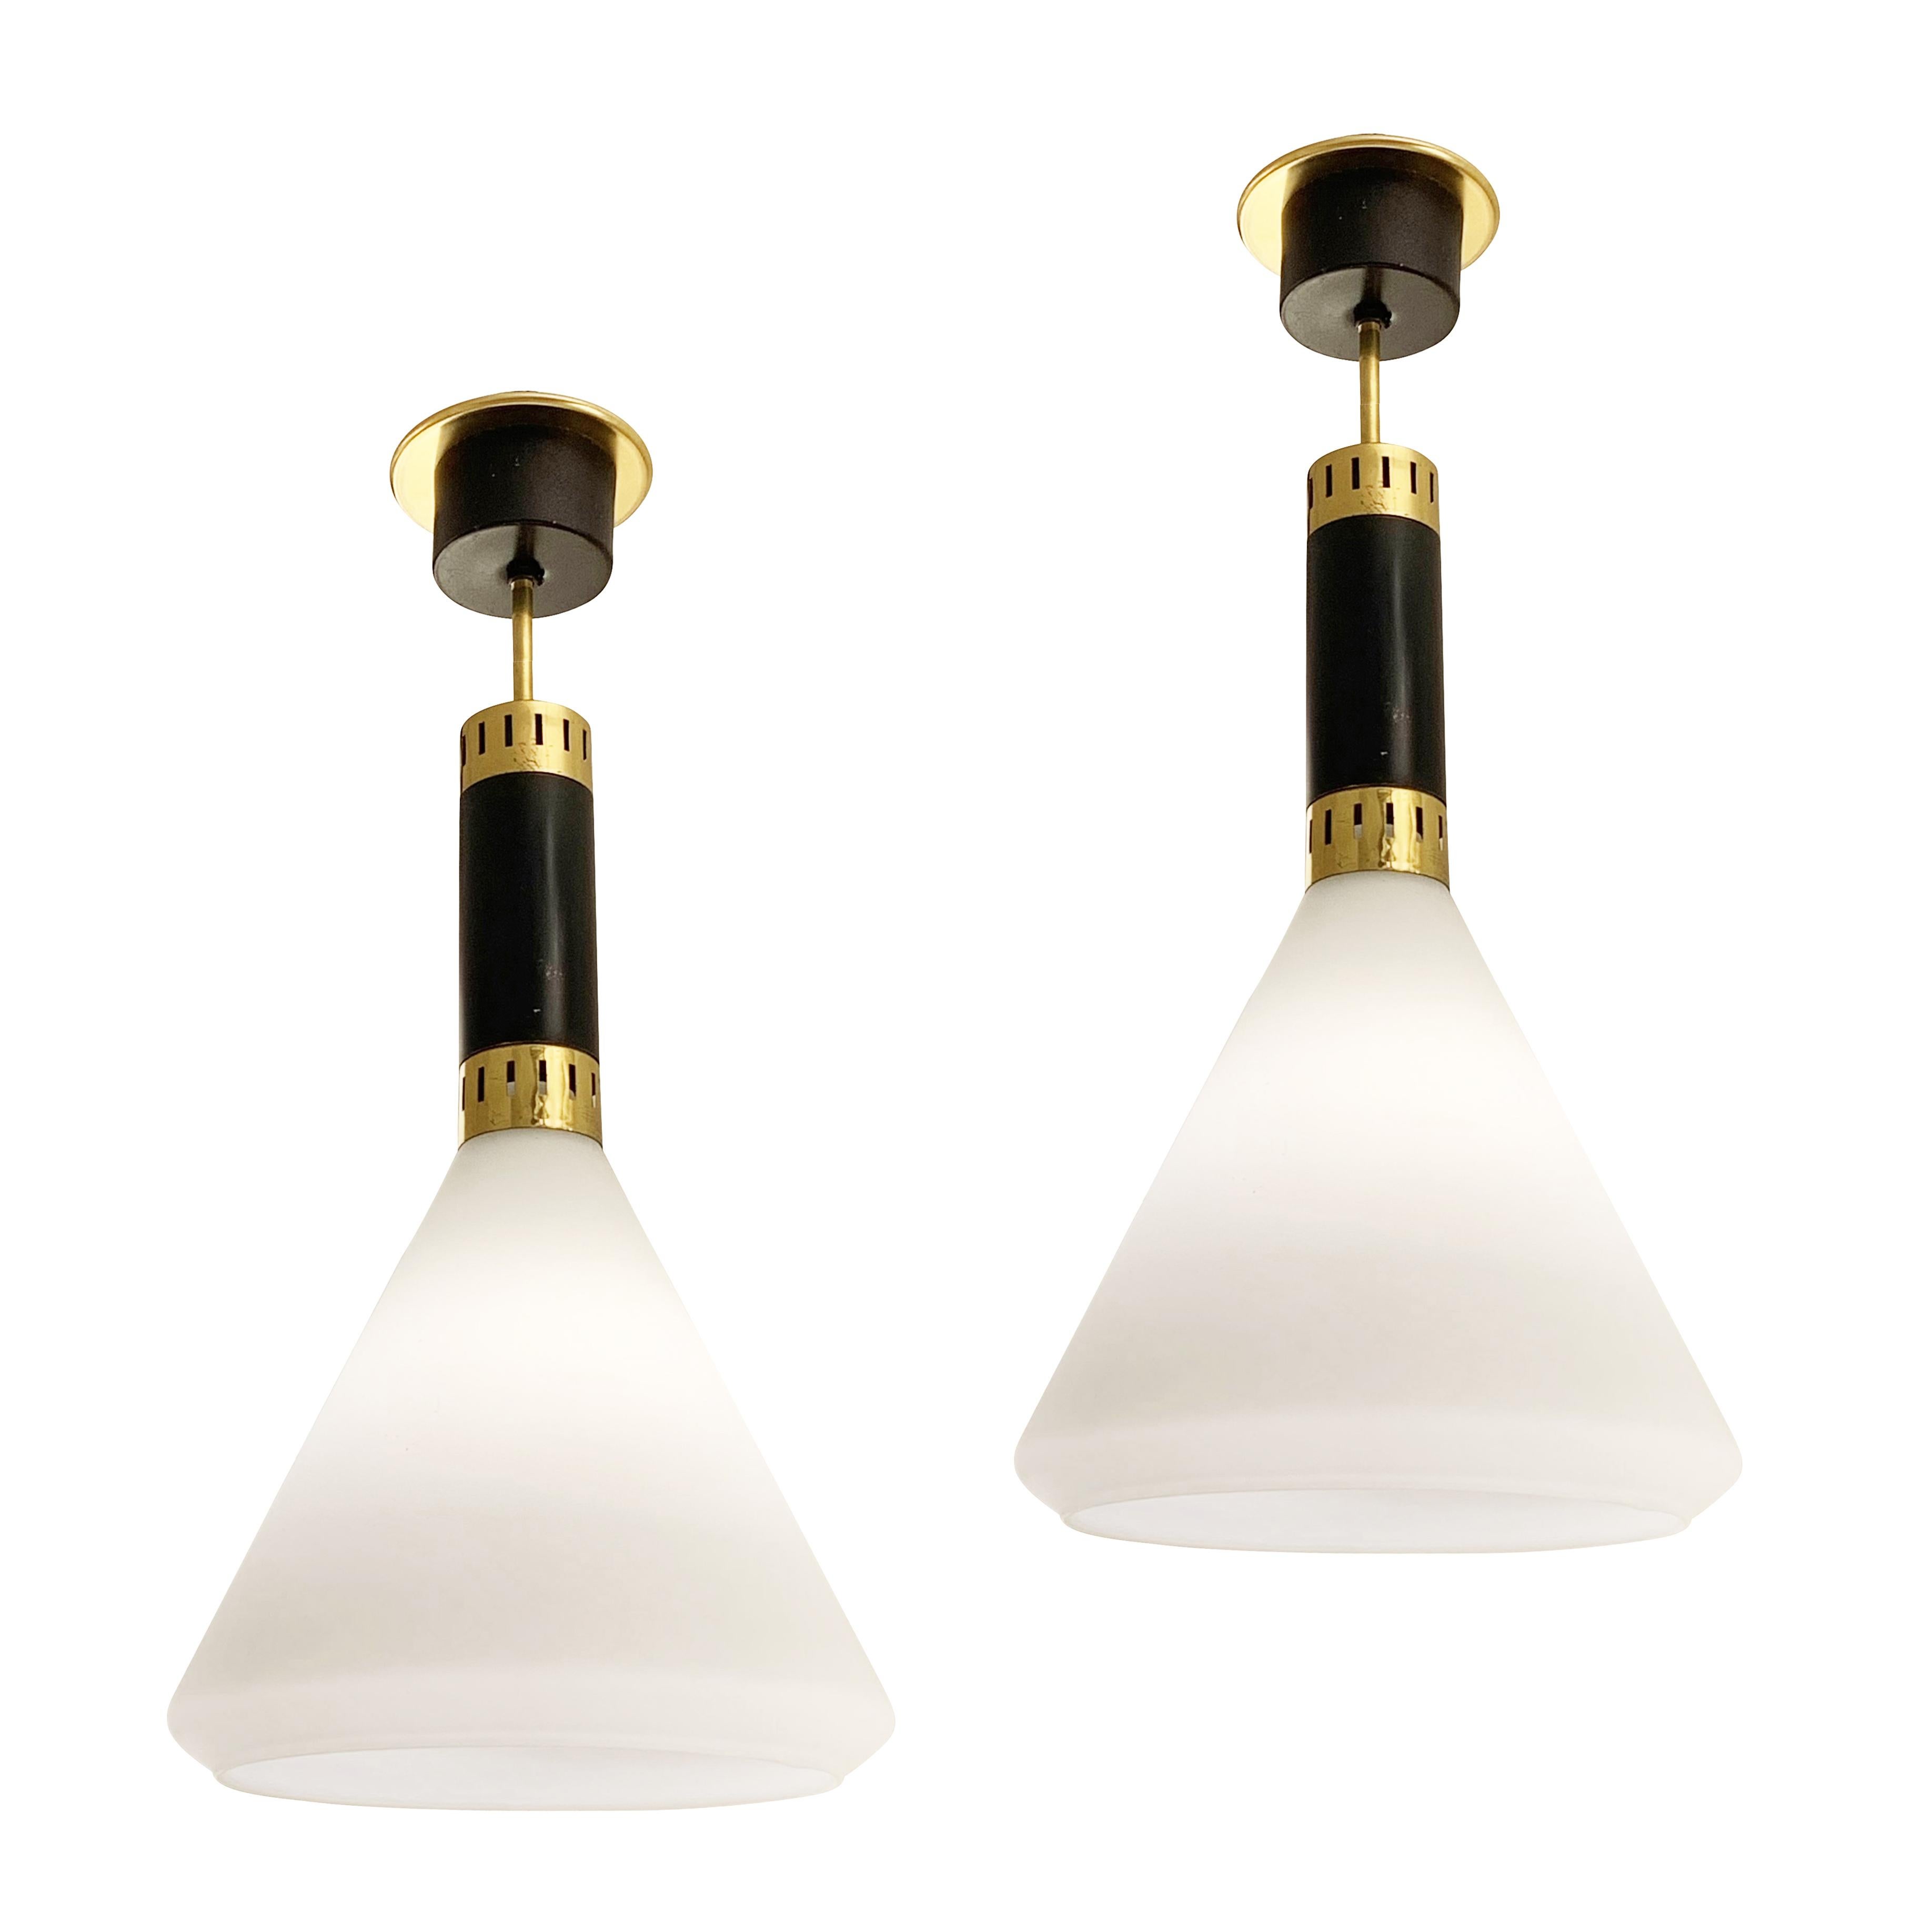 Italian Mid-Century pendants by Stilnovo. Frosted glass shades with brass and black lacquered hardware. Height of stem can be adjusted as needed. Each holds one E26 base bulb. Sold individually-price per light.

Condition: Excellent vintage